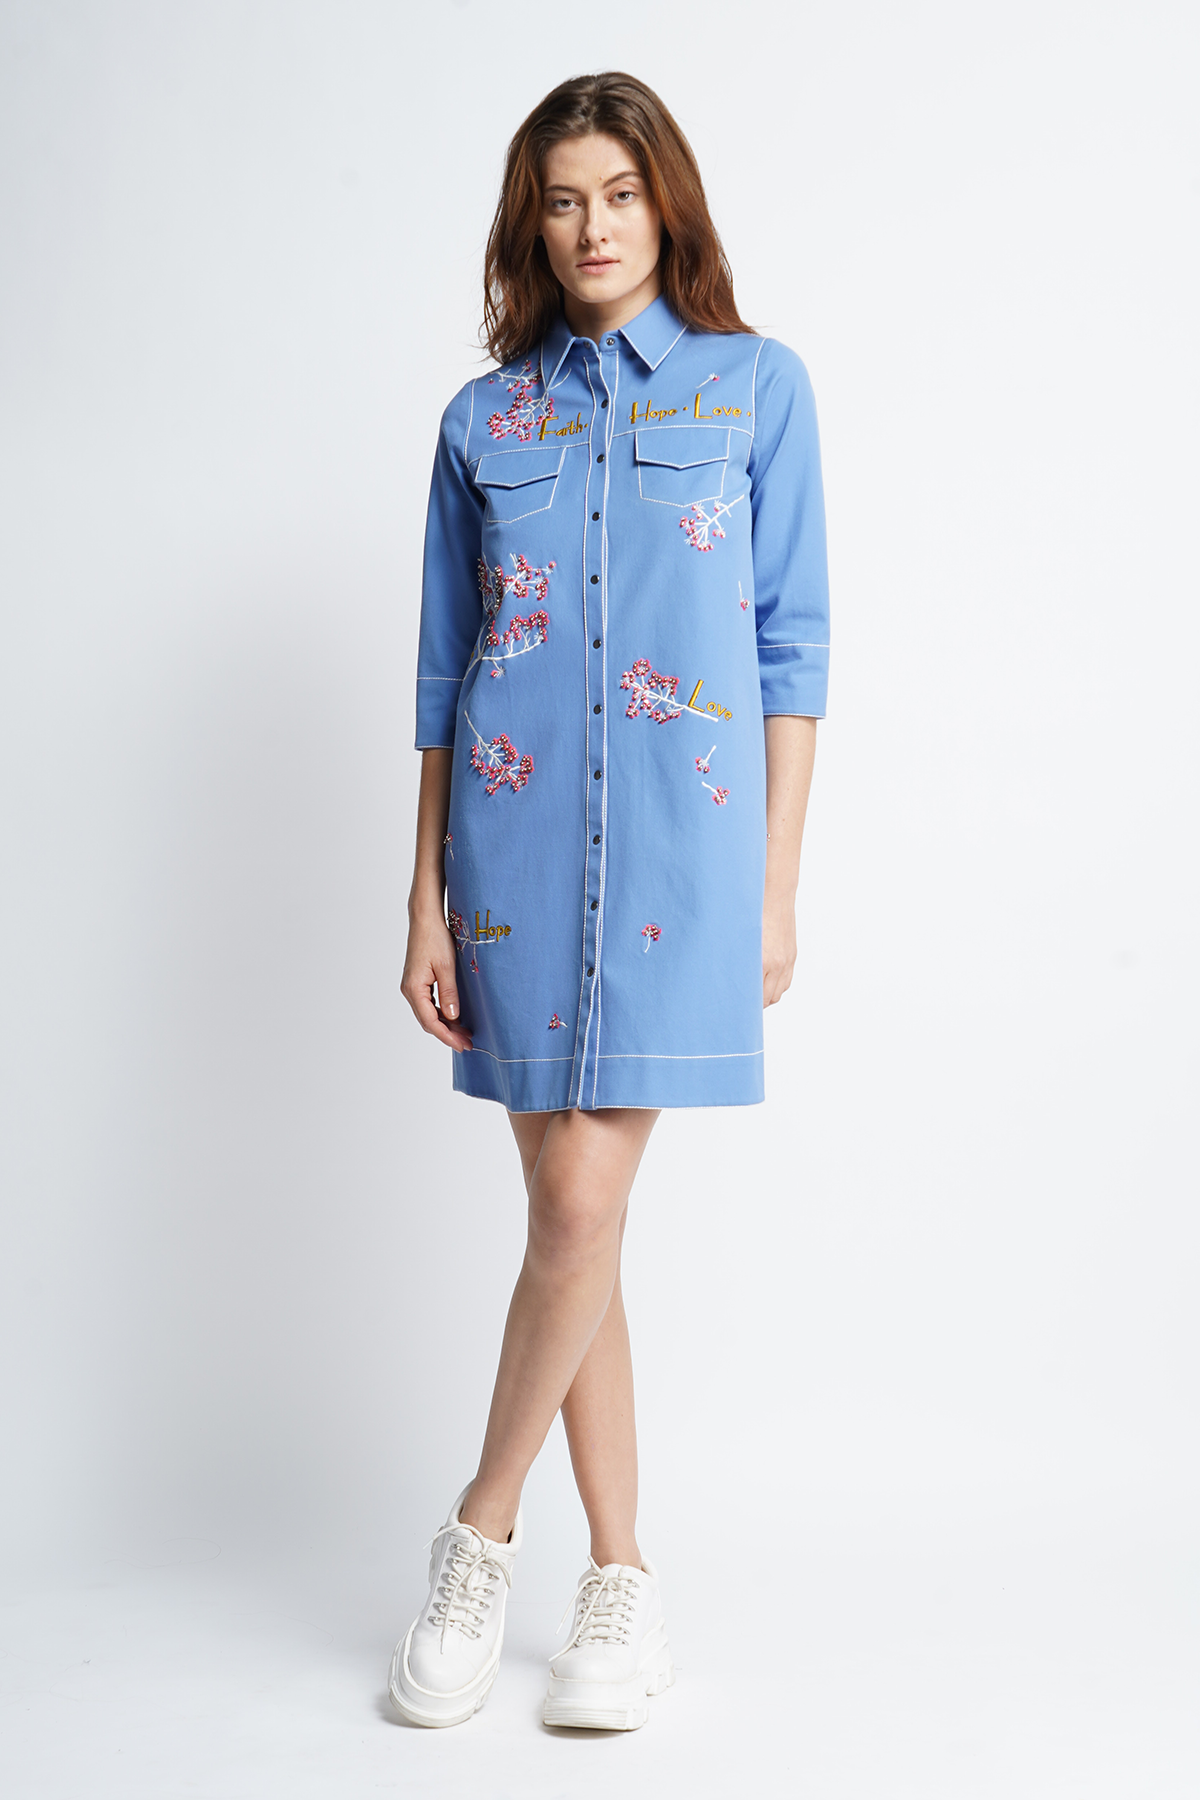 Scattered Branches Shirt Dress